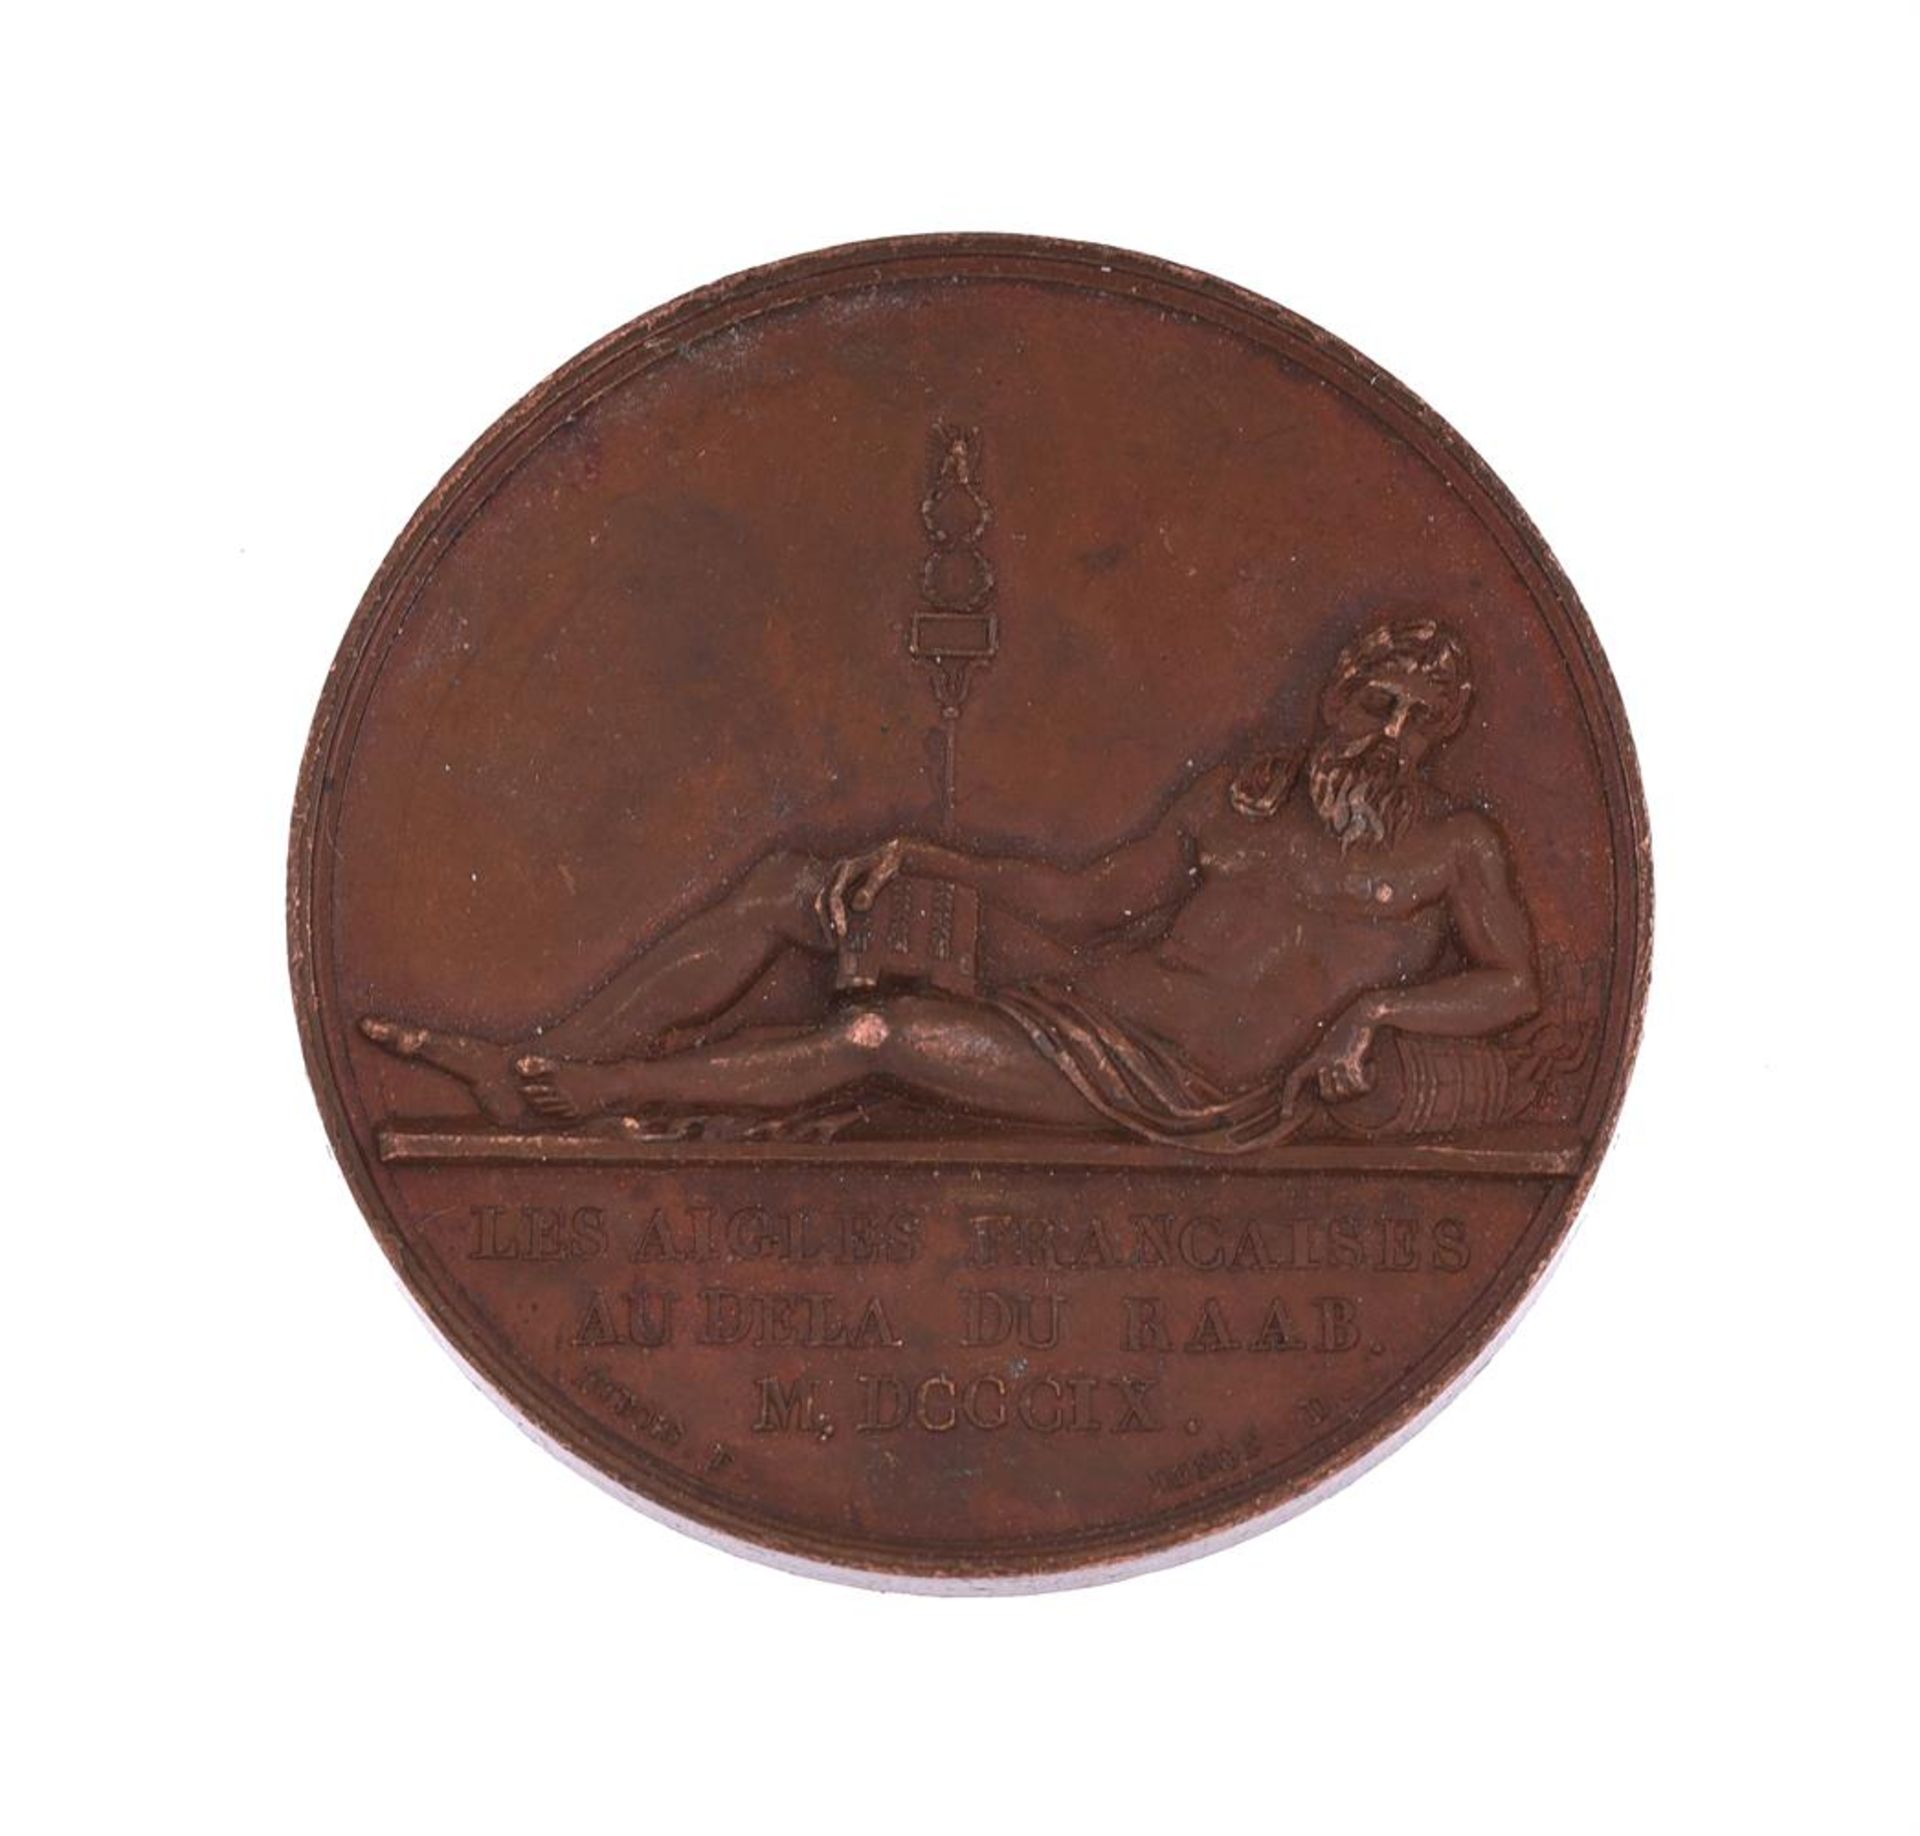 FRANCE, NAPOLEON, BATTLE OF RAAB 1809, BRONZE MEDAL BY ANDRIEU AND DUBOIS